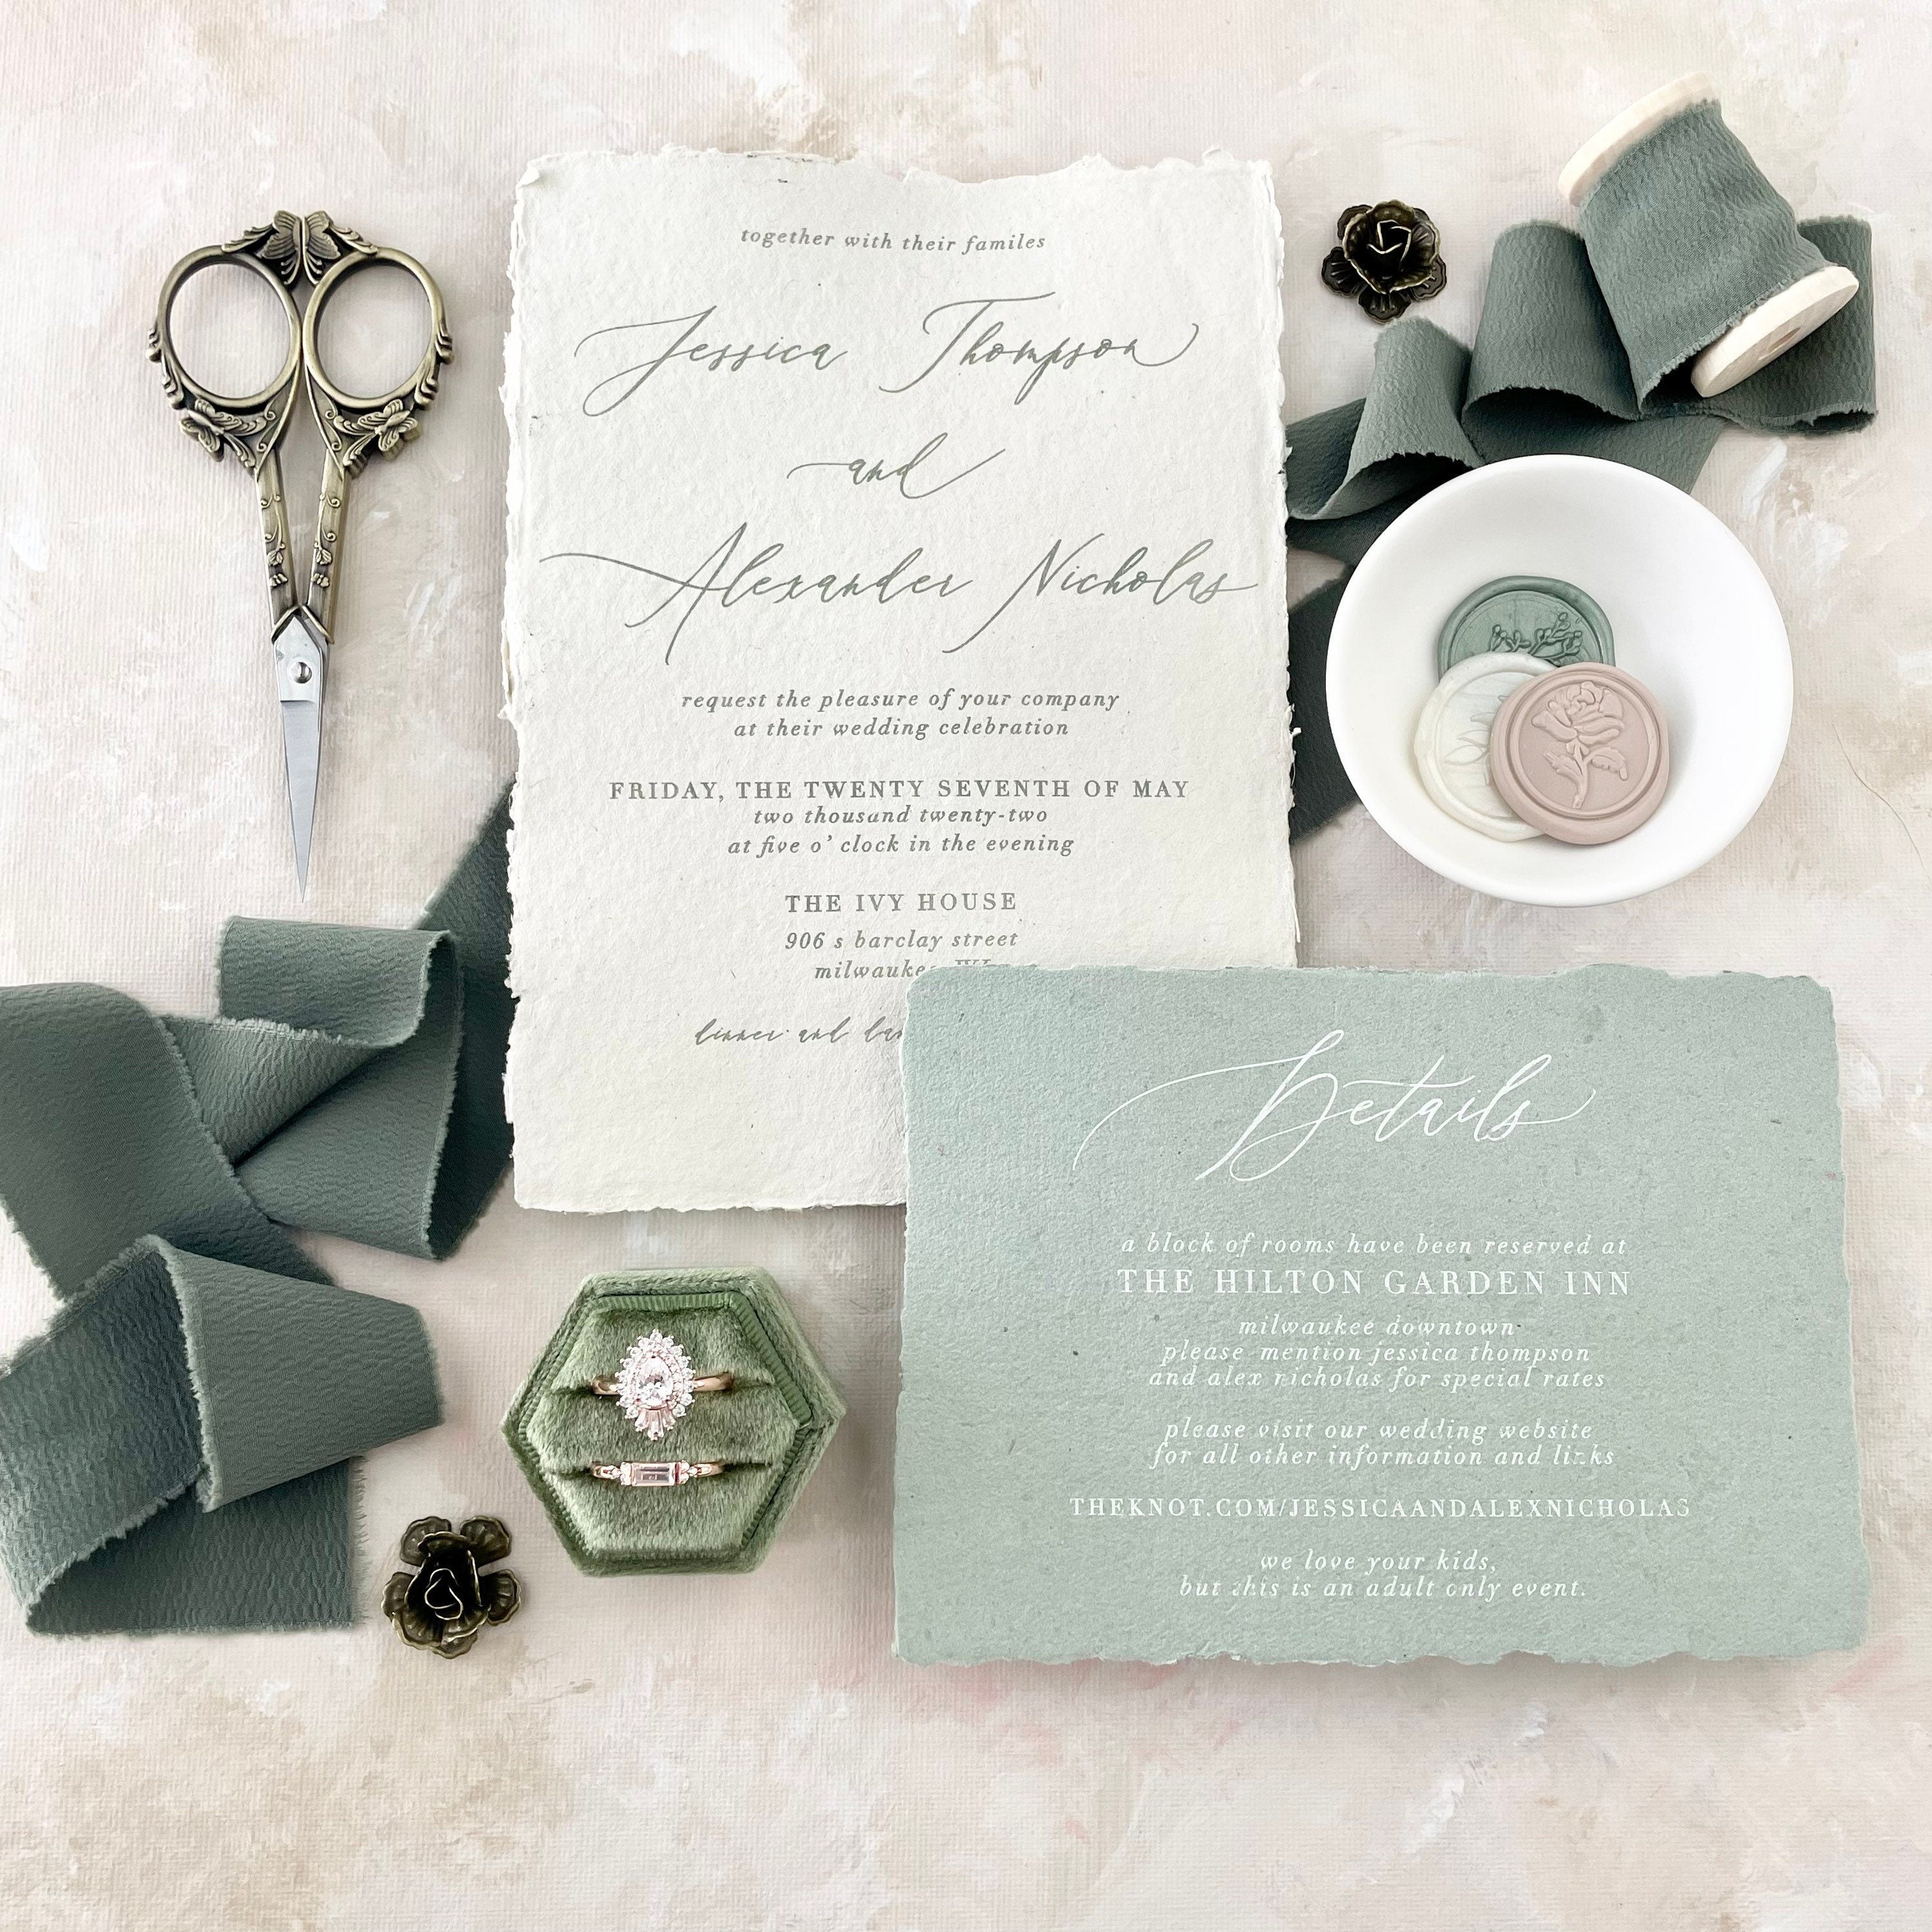 Sage green styling kit including sage green ring box, sage green ribbon, wedding invitation, vintage scissors, 3 wax seals in white dish and two Mini bronze styling flowers - Flat lay props from Champagne & GRIT